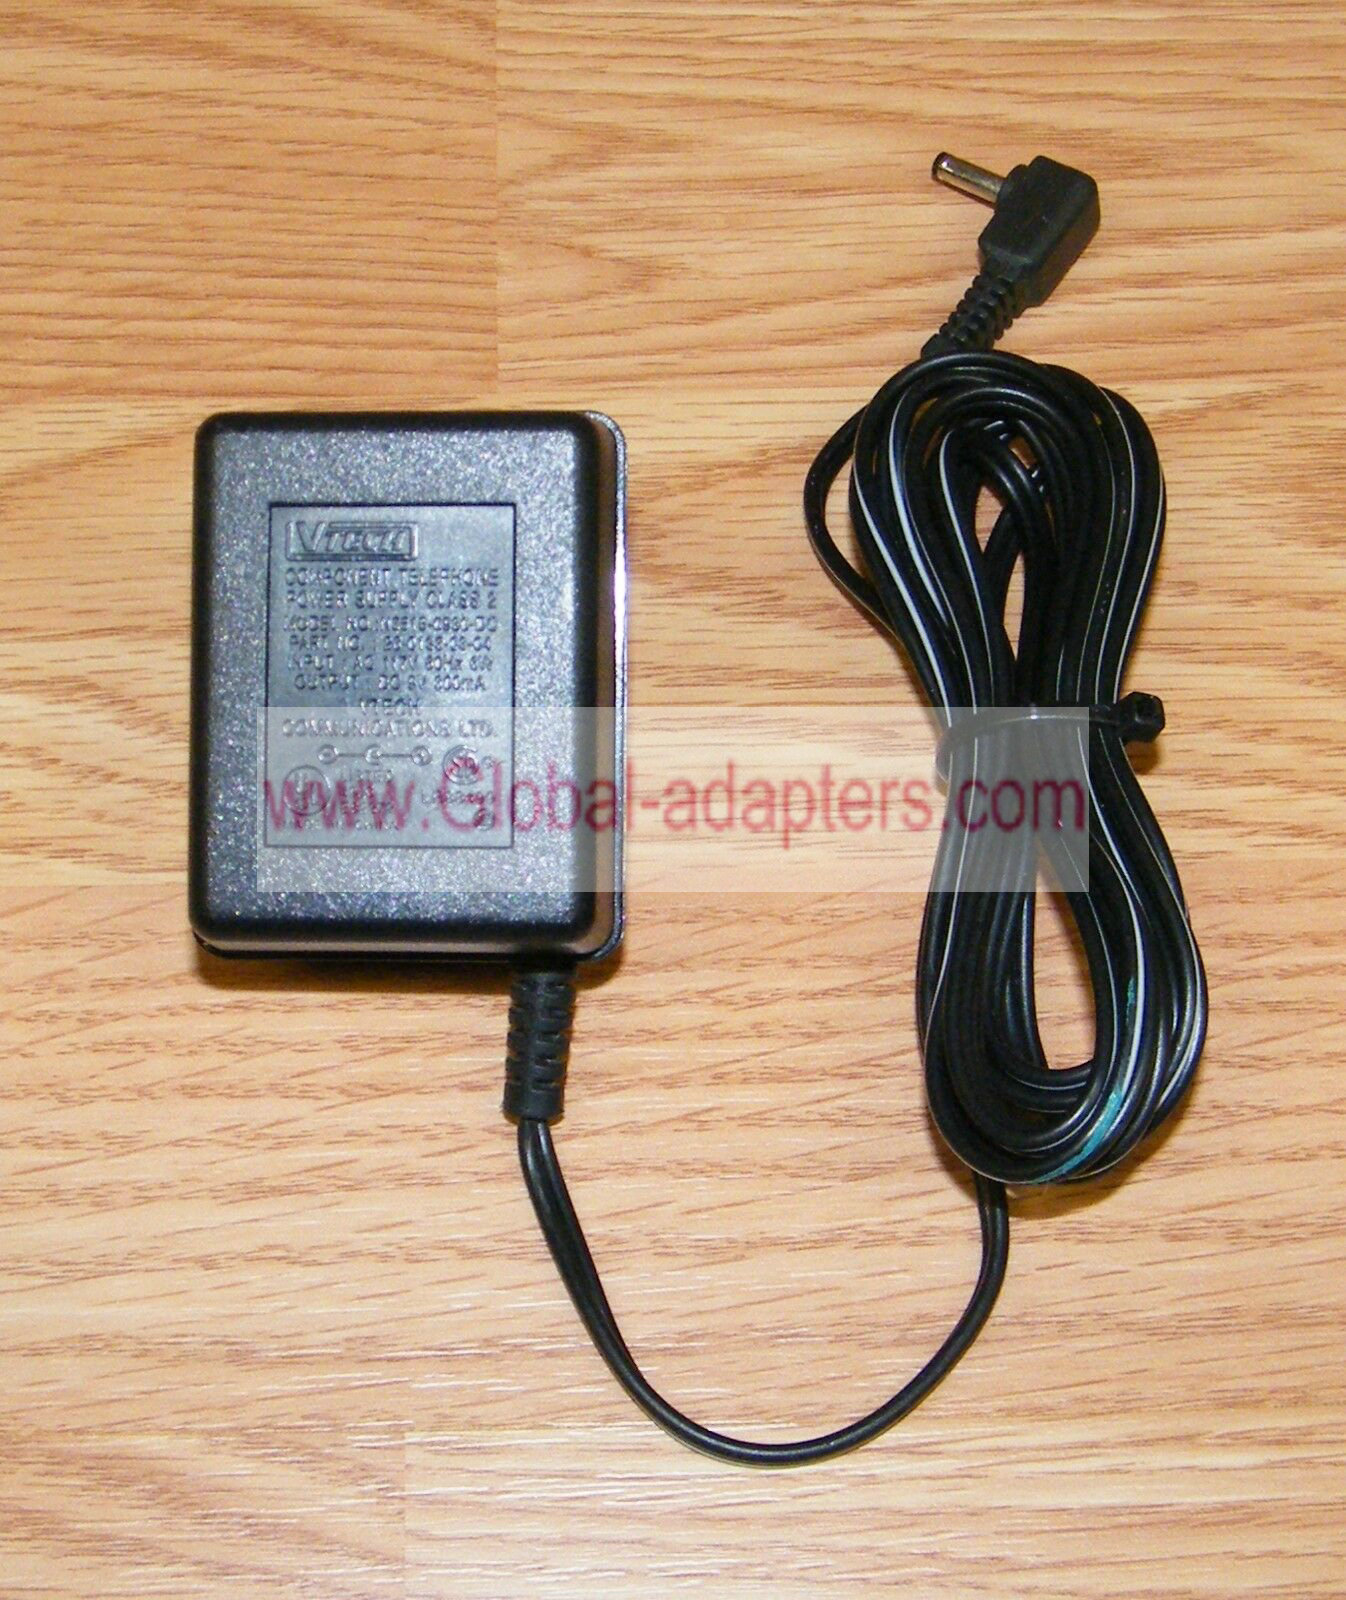 NEW Genuine 2 9V 300mA ac adapter for Vtech N3515-0930-DC Component Telephone Power Supply - Click Image to Close